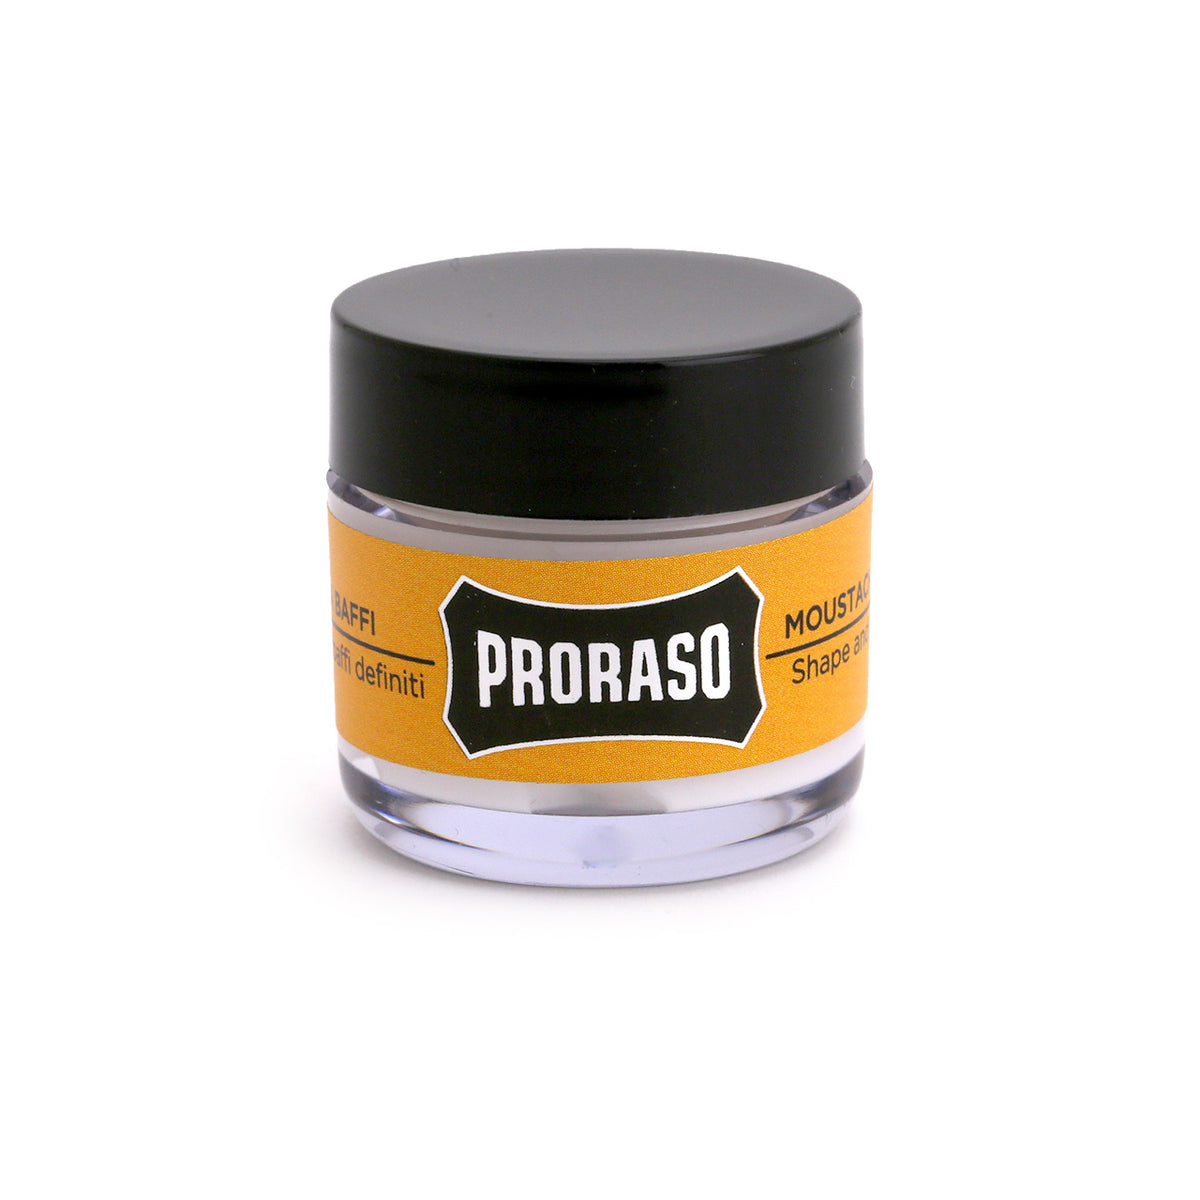 Proraso moustache Wax - Wood and Spice in a small glass jar with black lid. Front View